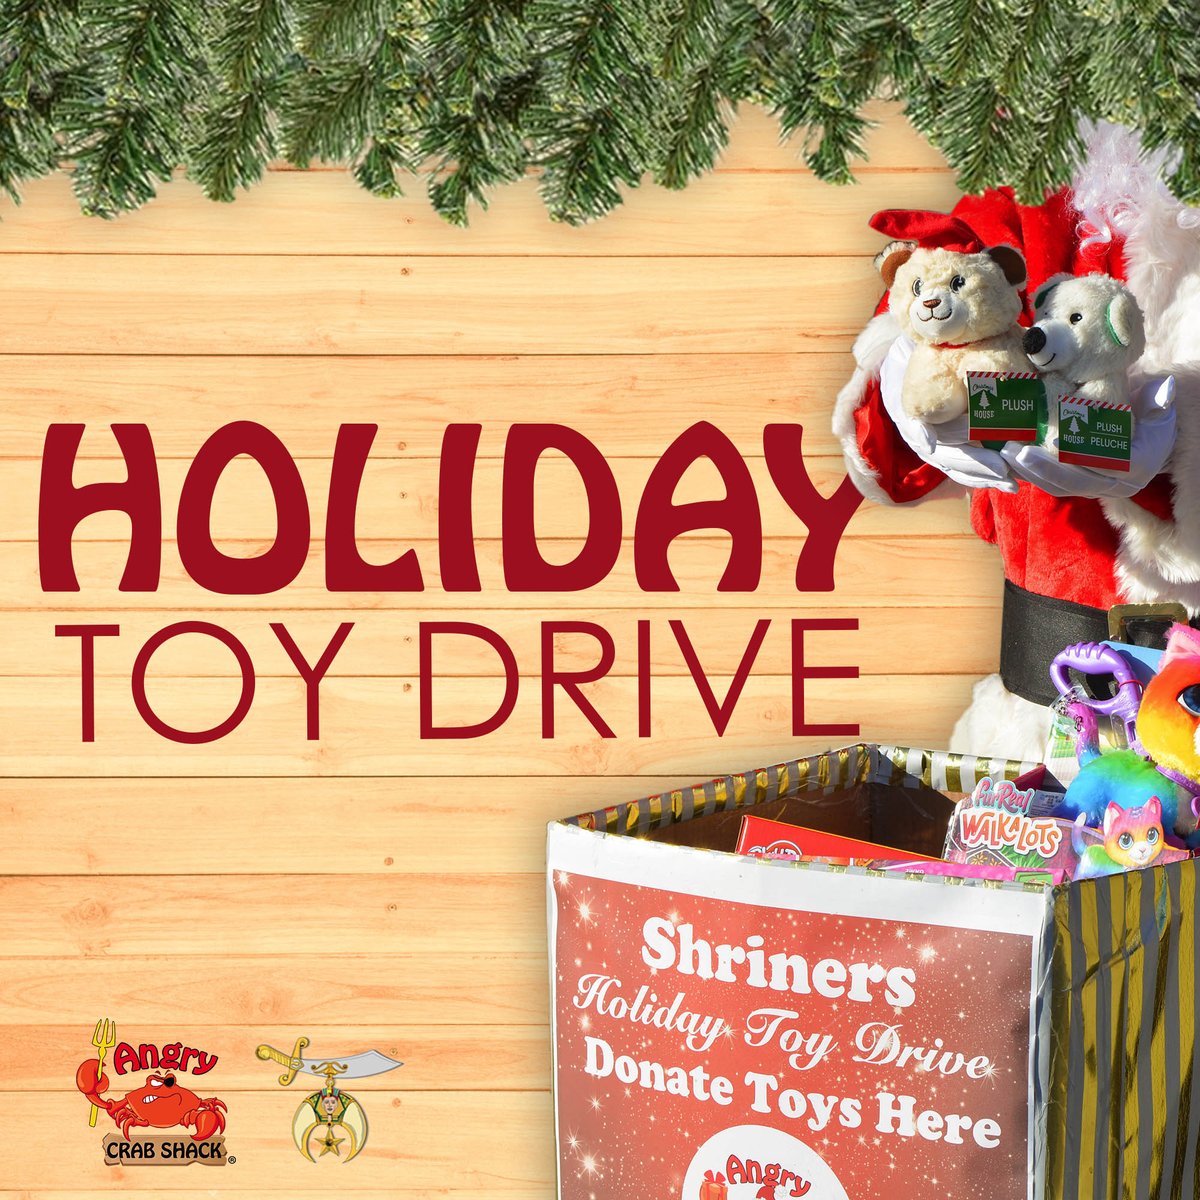 Santa needs your help! 🎅 We are hosting our annual toy drive benefiting Shriners Hospitals for Children. 🧸 #holidaydonations #Crabbing #AngryCrabShack #AzFoodie #Seafoodboil #Holiday #toydrive #toy #giveback #holidayseason #Shriners #Holidaytoydrive #community #christmascheer